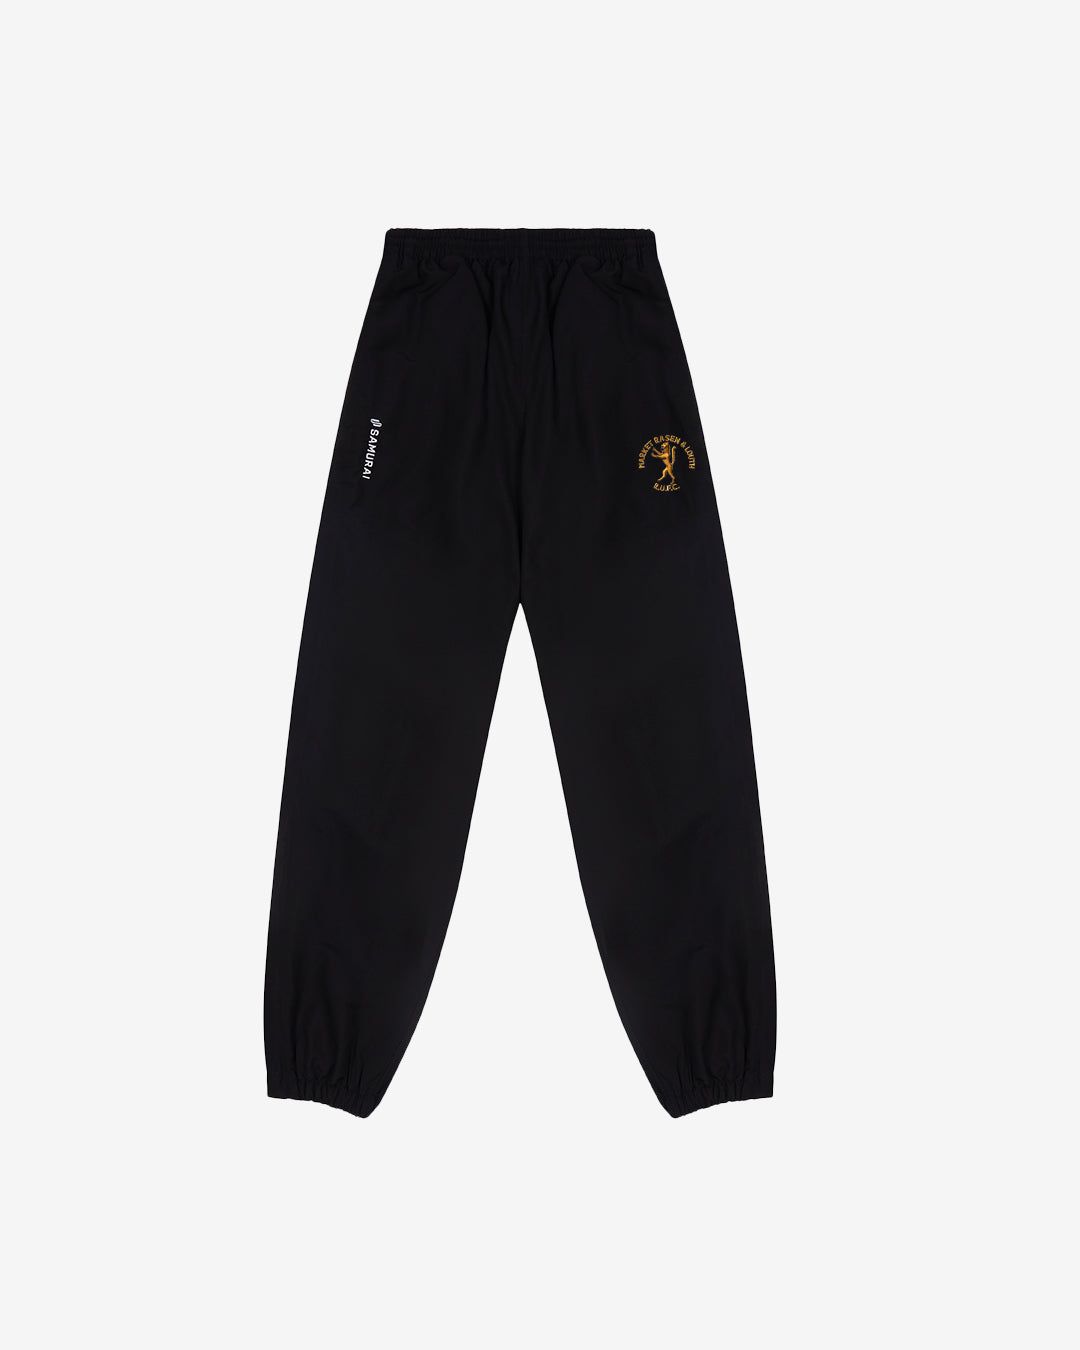 Market Rasen and Louth RUFC - EP:0104 - Southland Track Pant 2.0 - Black